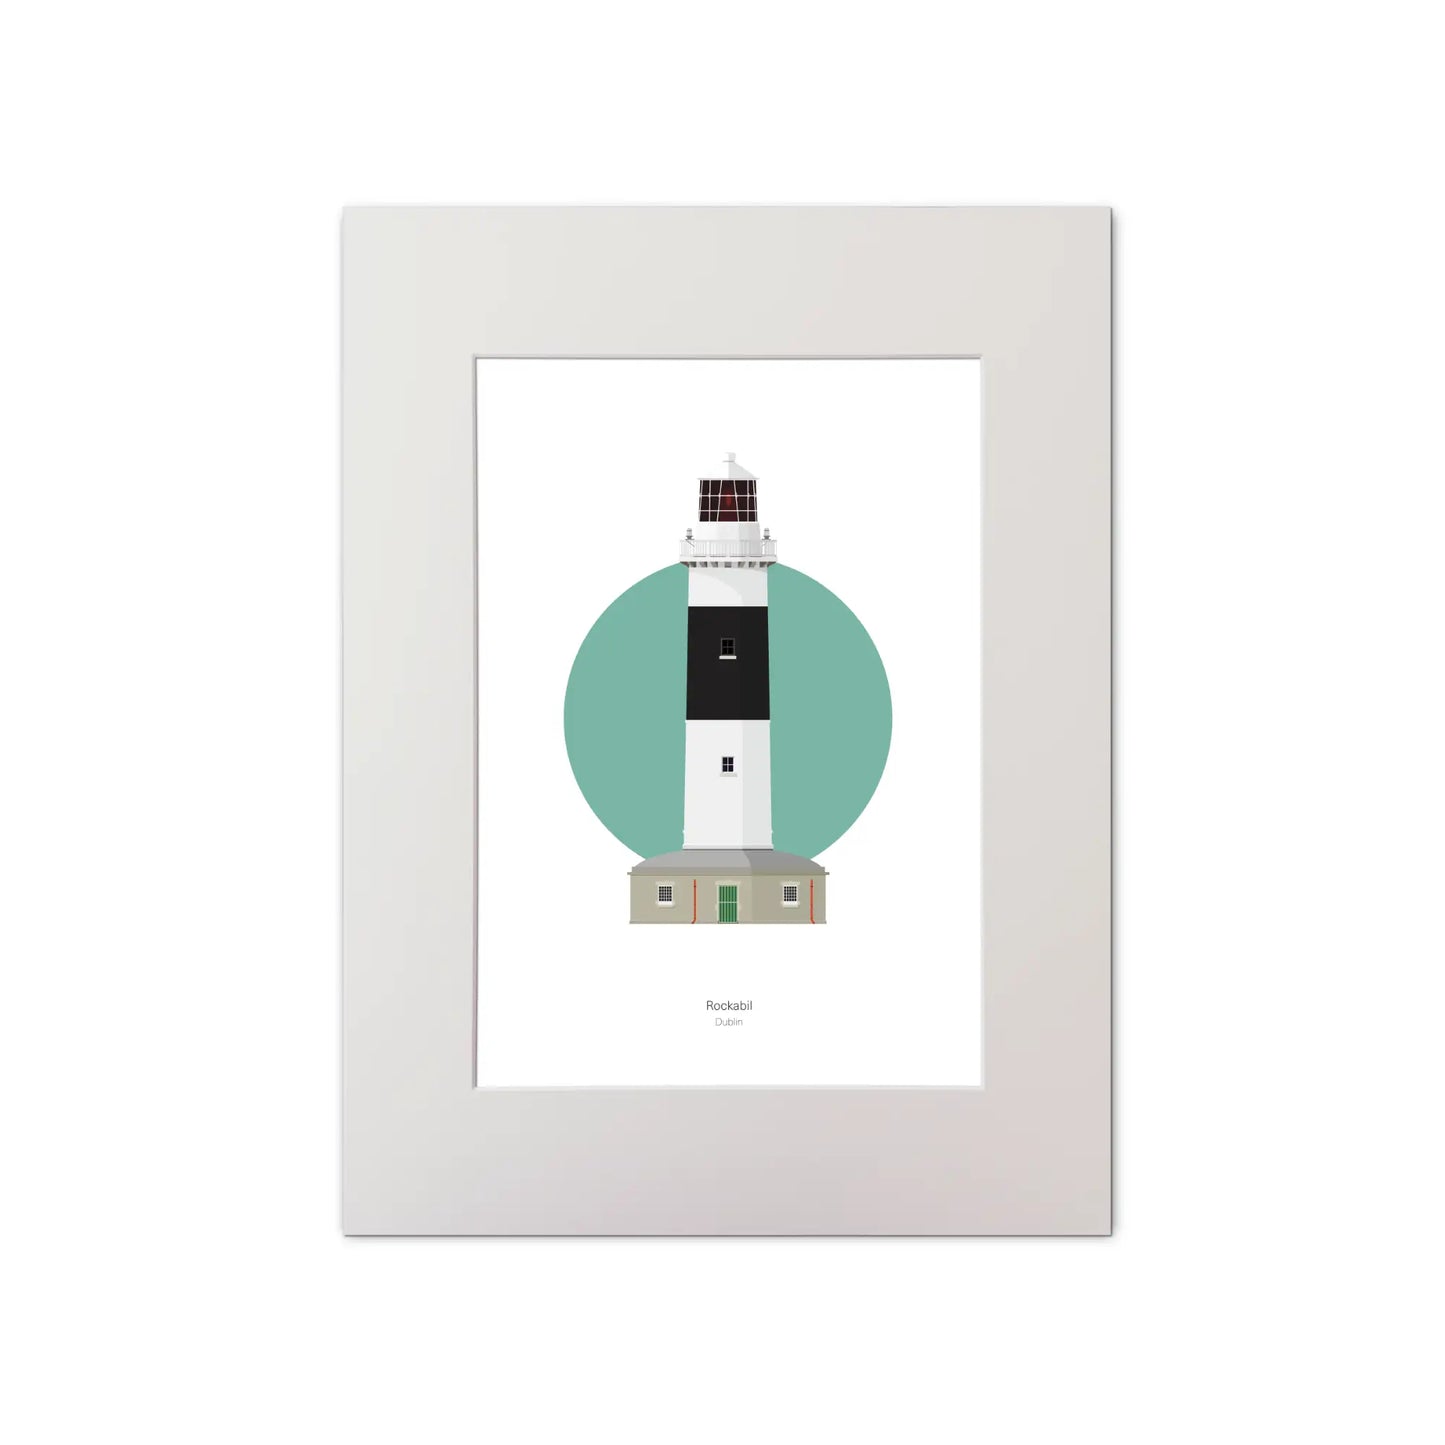 Illustration of Rockabill lighthouse on a white background inside light blue square, mounted and measuring 30x40cm.